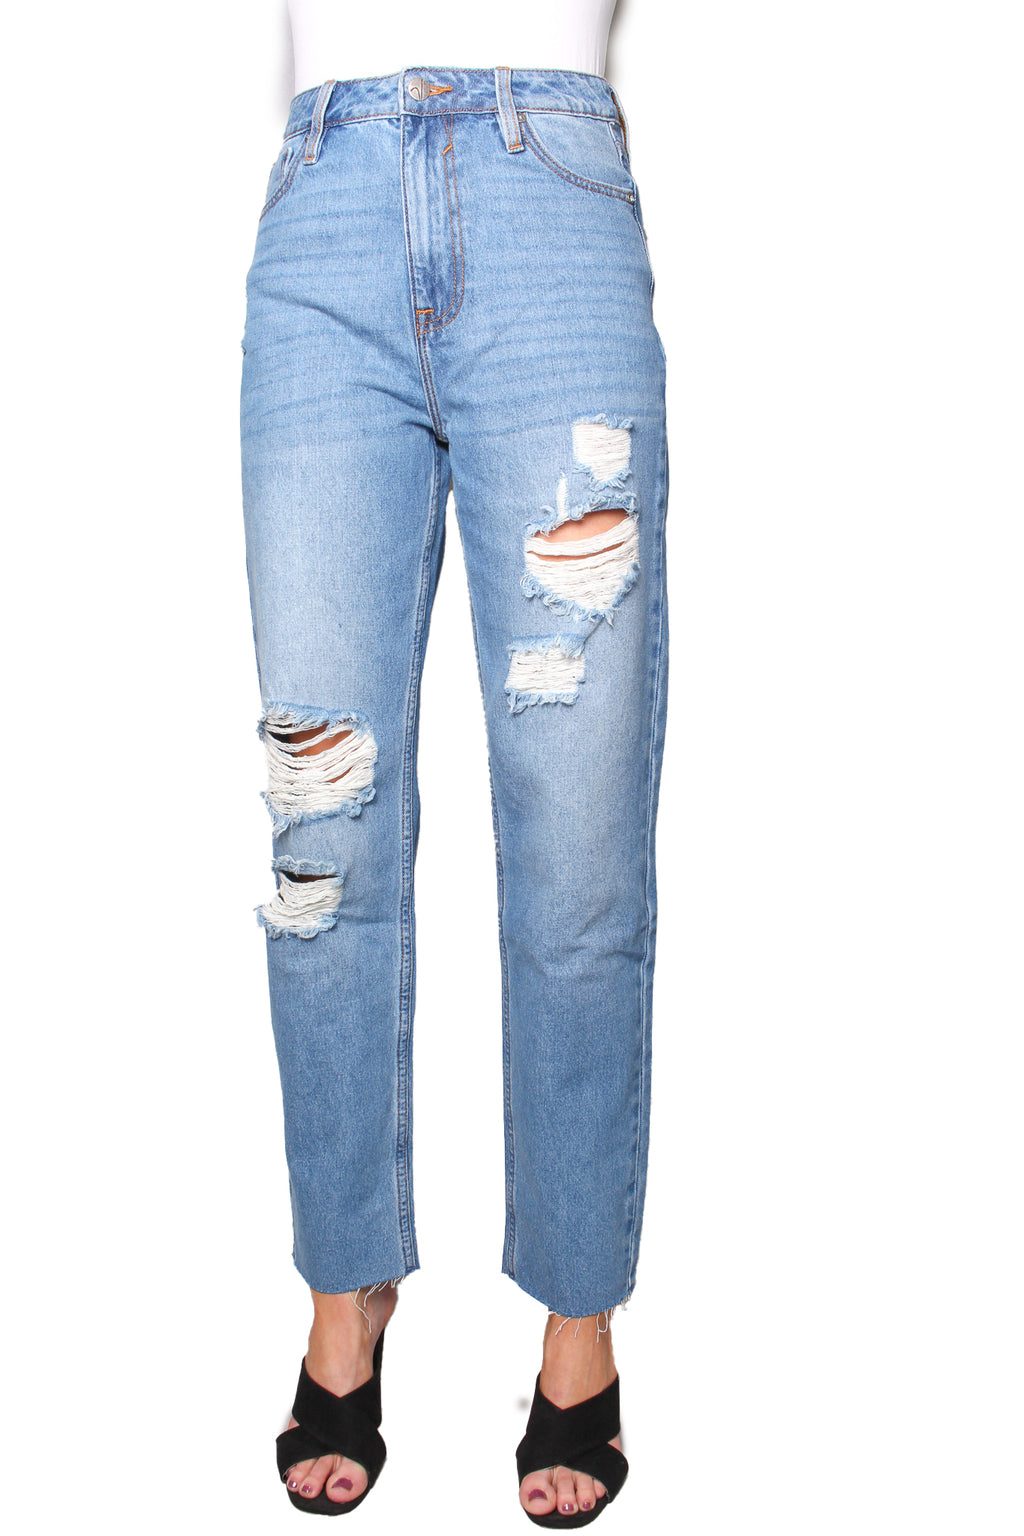 Women's High Waisted Tattered Frayed Jeans